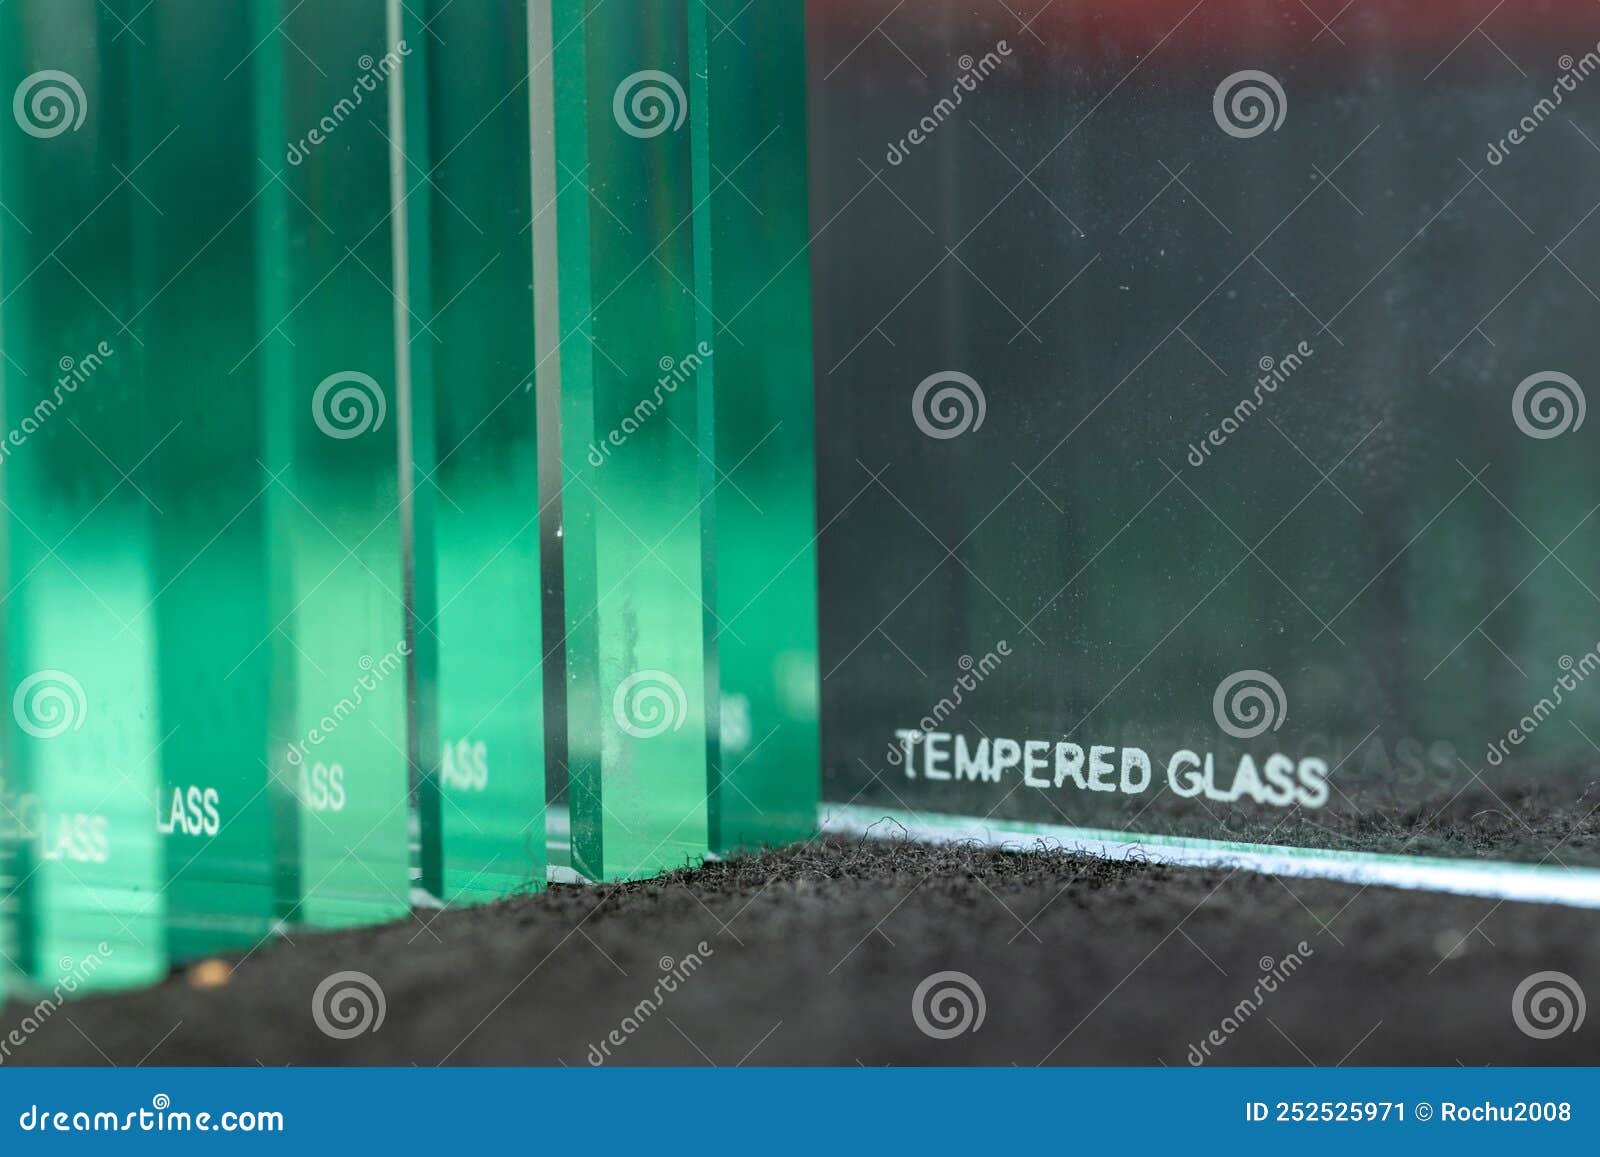 tempered glass, inscription burned on thick glass to protect the material from breaking, construction industry